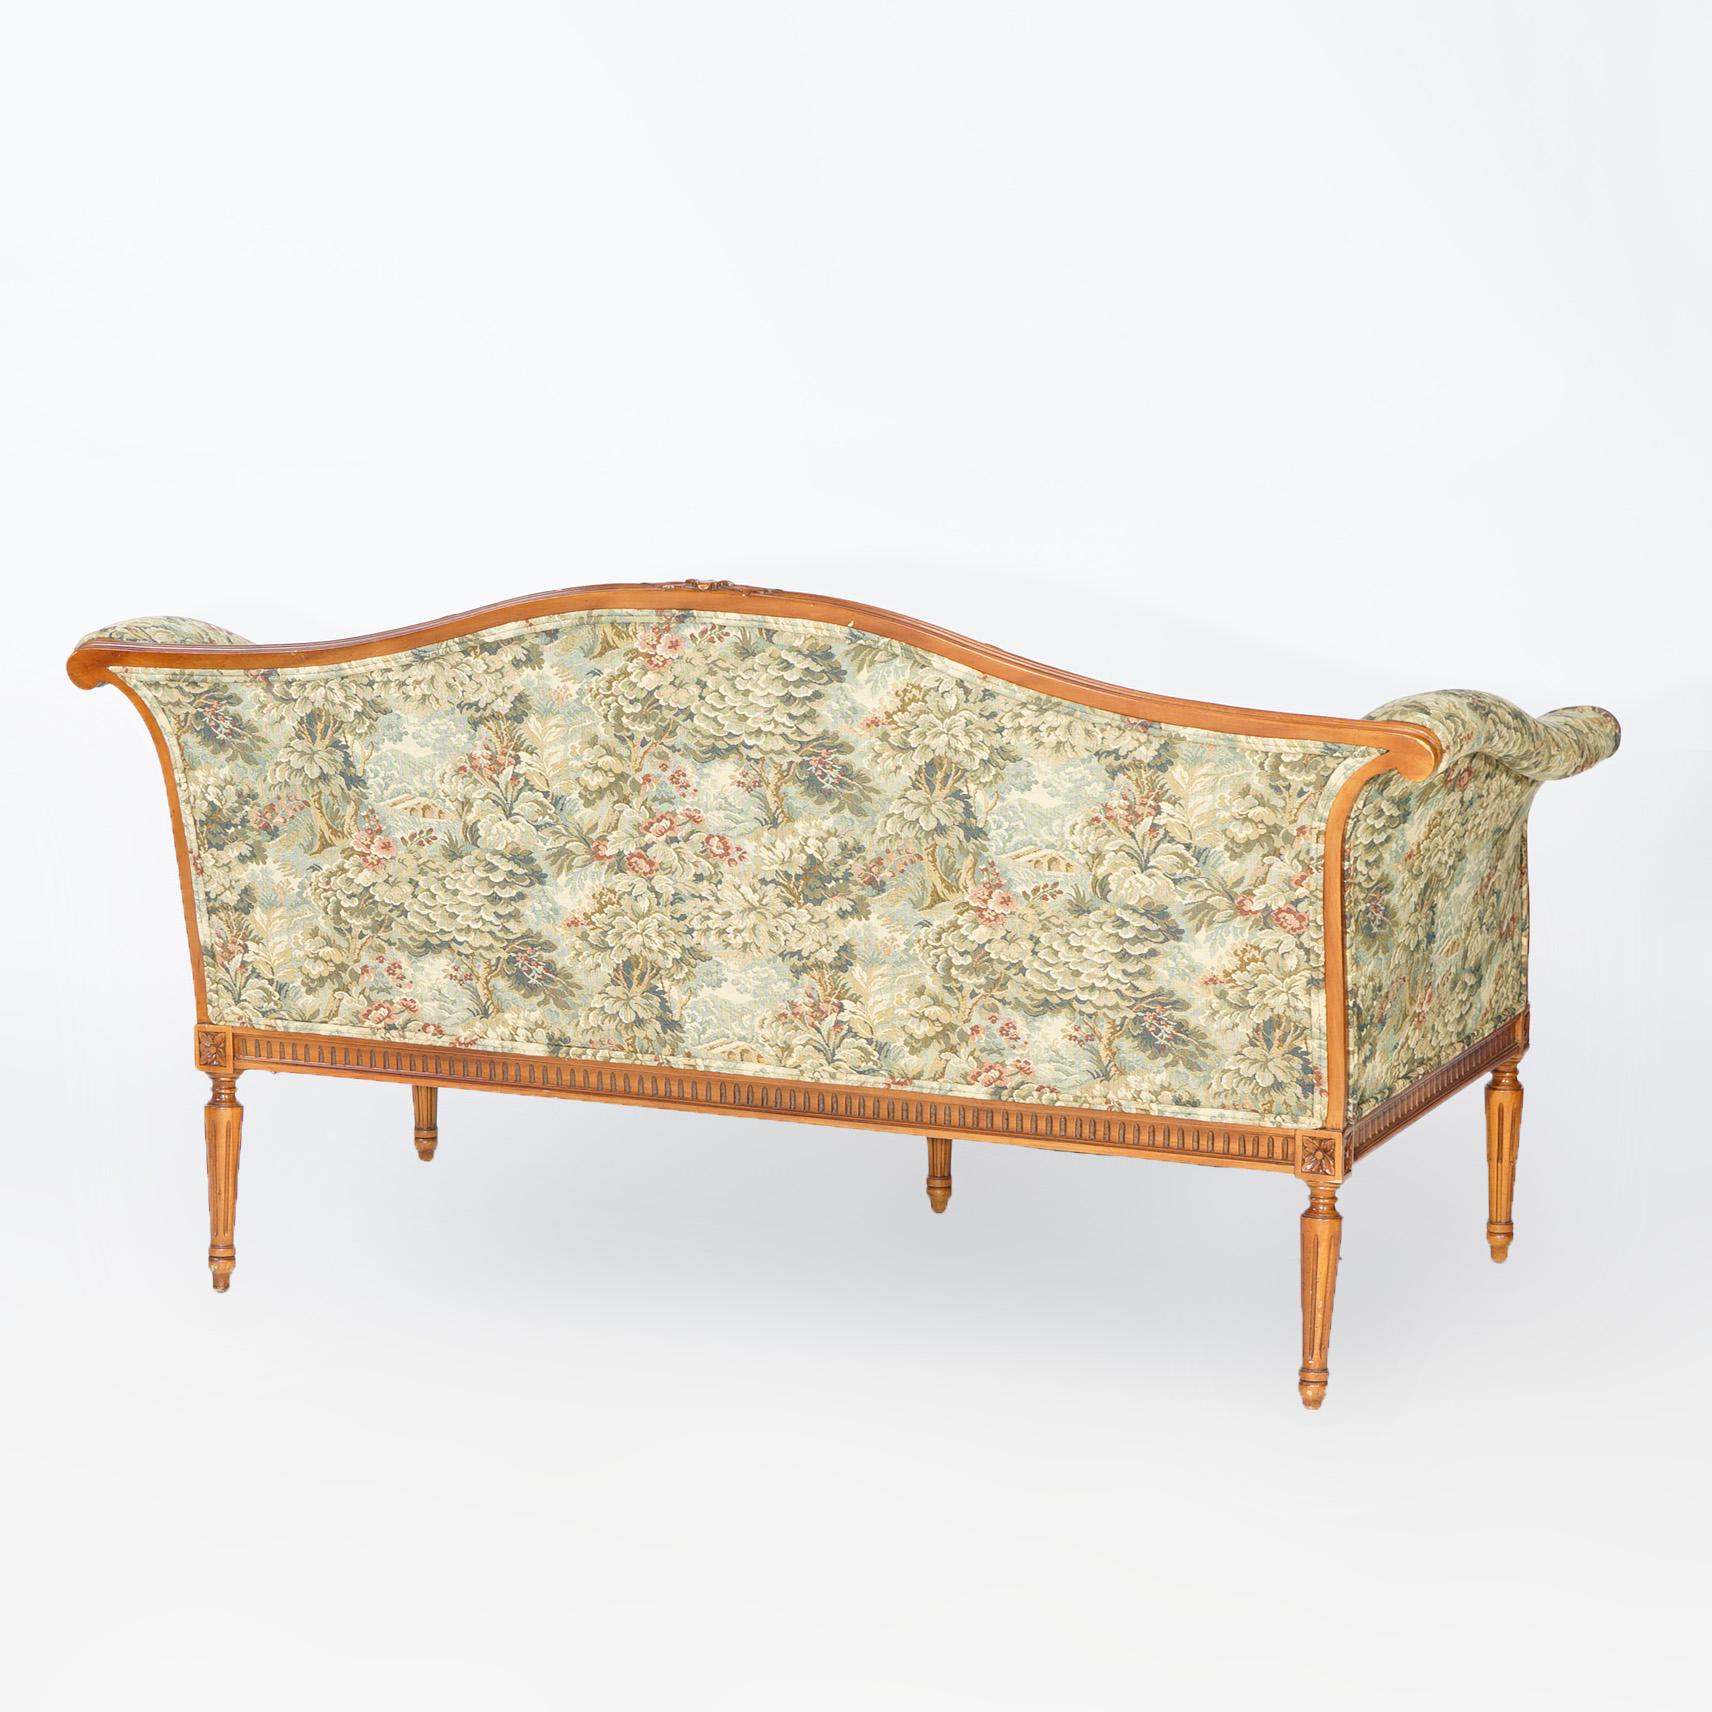 Louis XV Pair French Style John Widdicomb Furniture Company Upholstered Settees, 20th C.